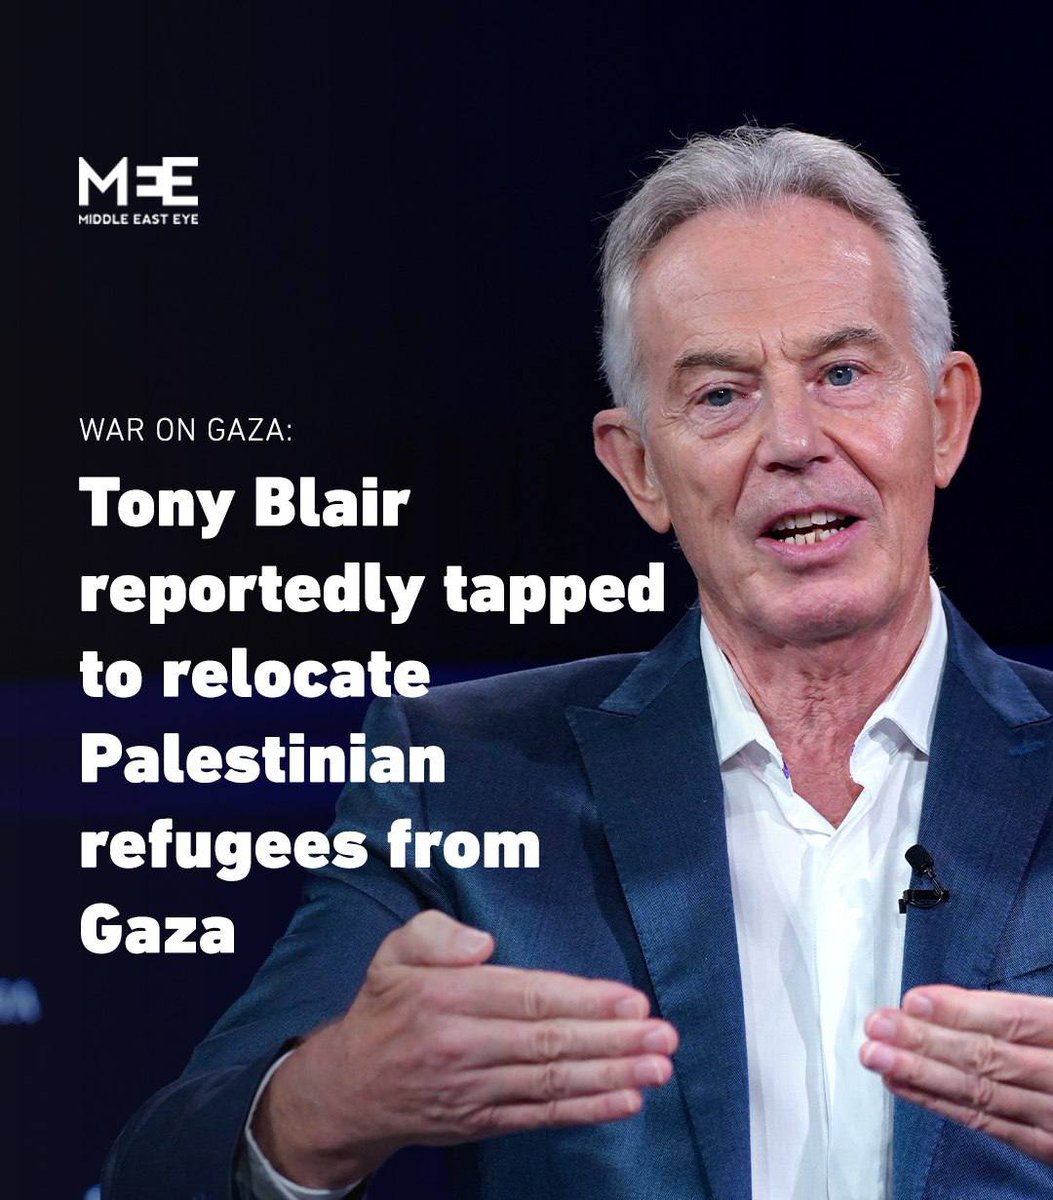 How about getting Israel out of Gaza and allowing Palestine to be a free state? There'd be fewer refugees if there were fewer war criminals like Blair and Netanyahu. #Israel #Palestine #Blair #WarCrimesbyIsreal